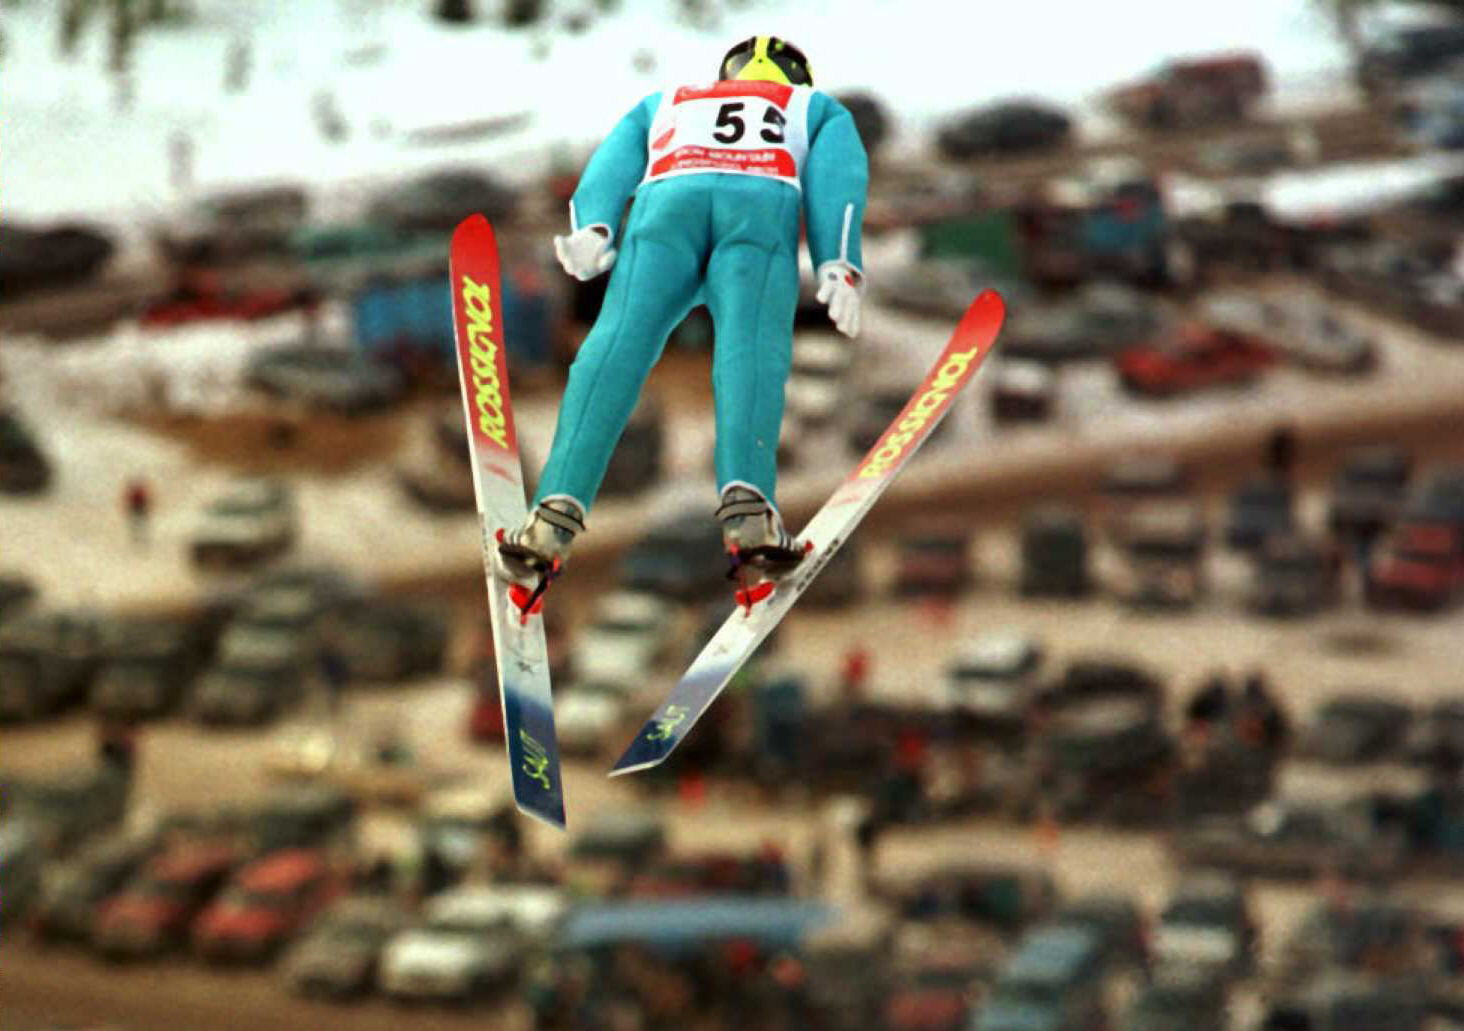 Iron Mountain last held a FIS Ski Jumping World Cup in 2000 ©Getty Images